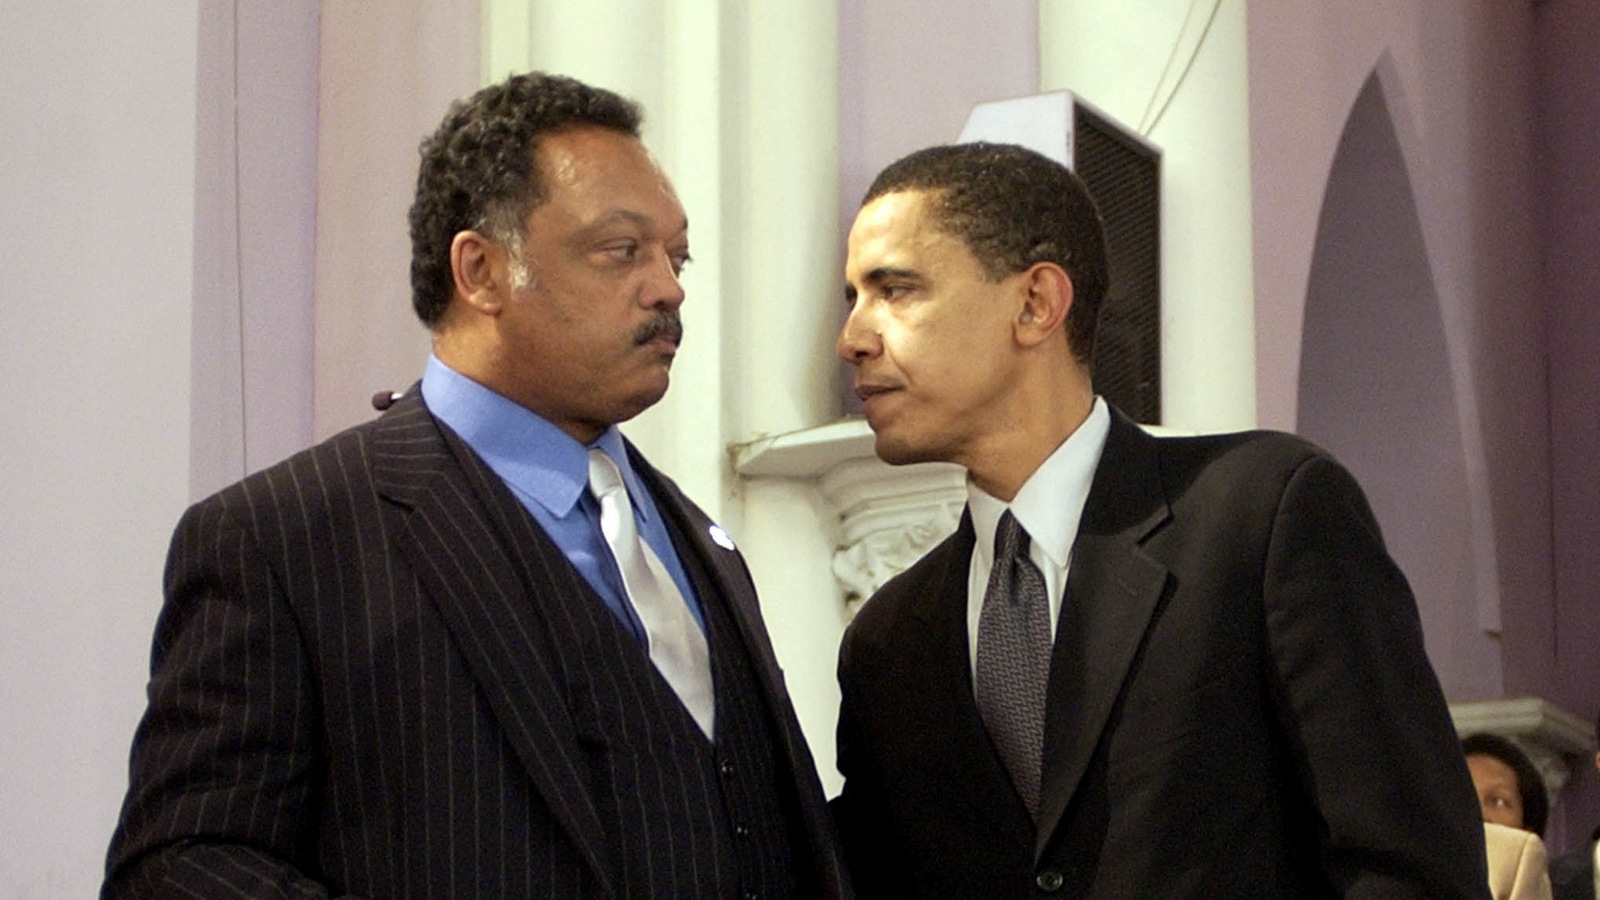 Barack Obama, right, chats with the Rev. Jesse Jackson at the Salem Baptist Church, March 14, 2004, in Chicago. Barack was at the church to speak to supporters before the upcoming elections. (AP/Steve Matteo)